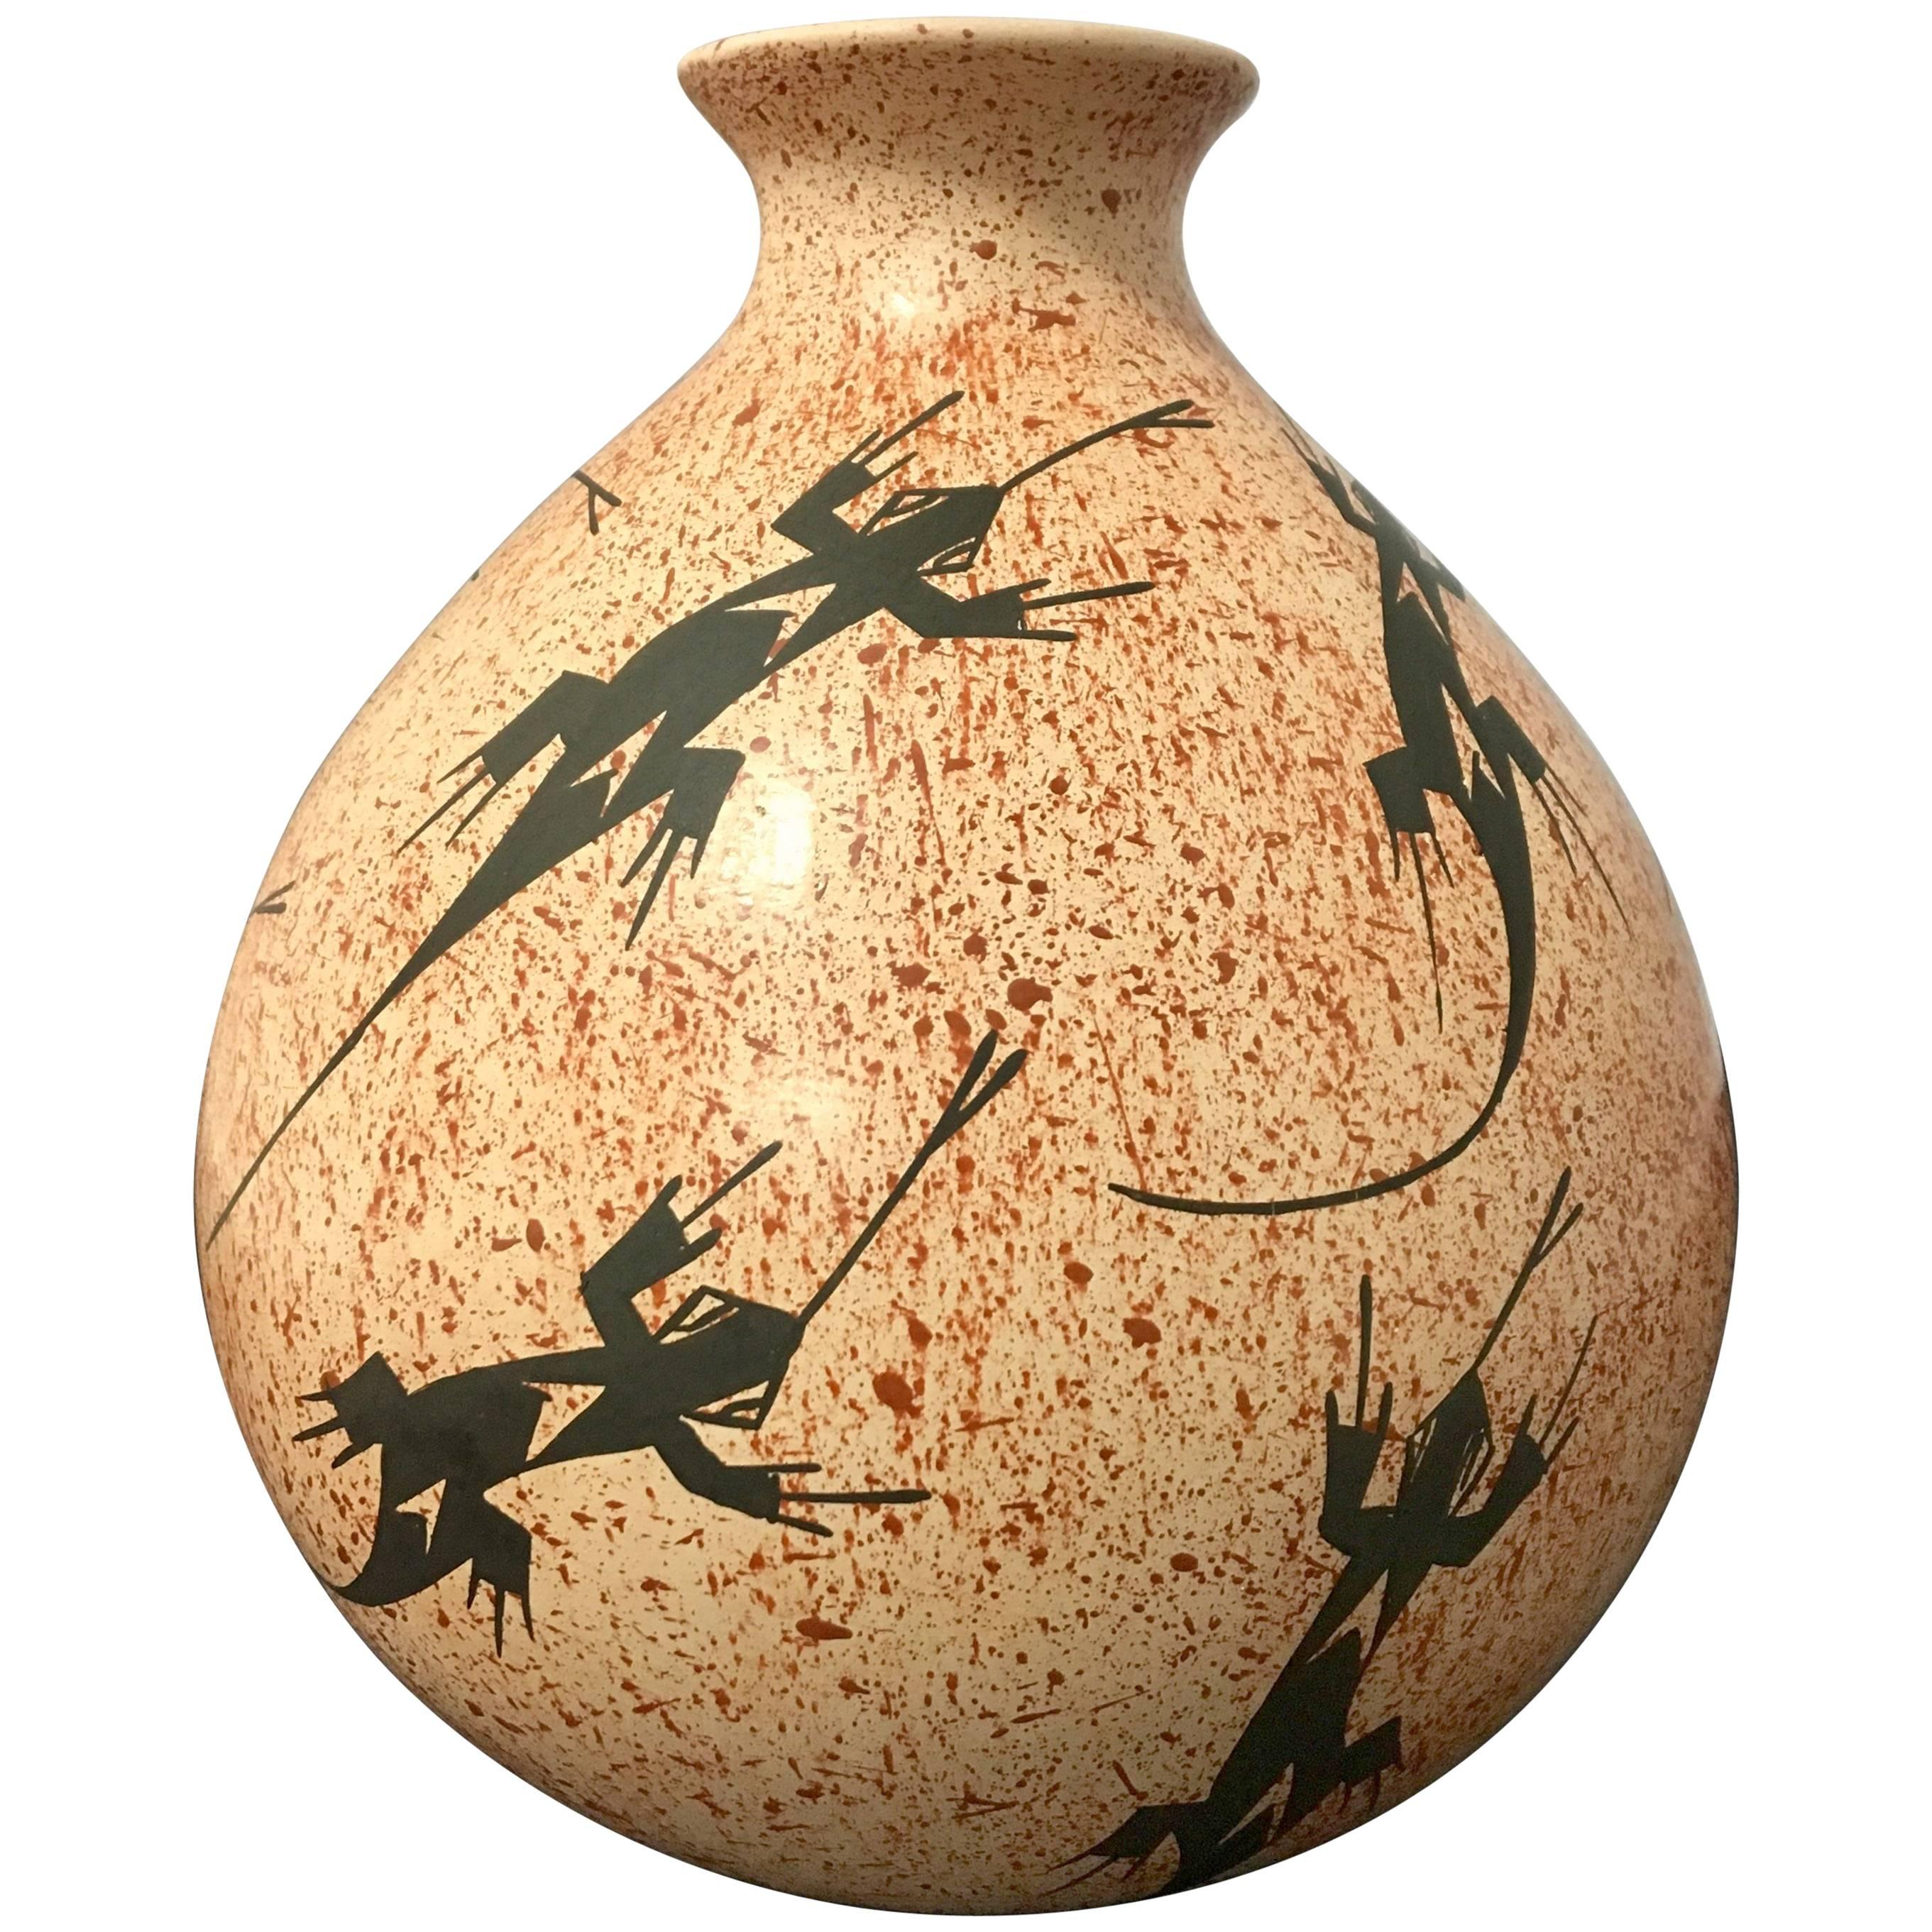 Mata Ortiz Pottery Vase / Olla by Victor Reyes Geckos Signed